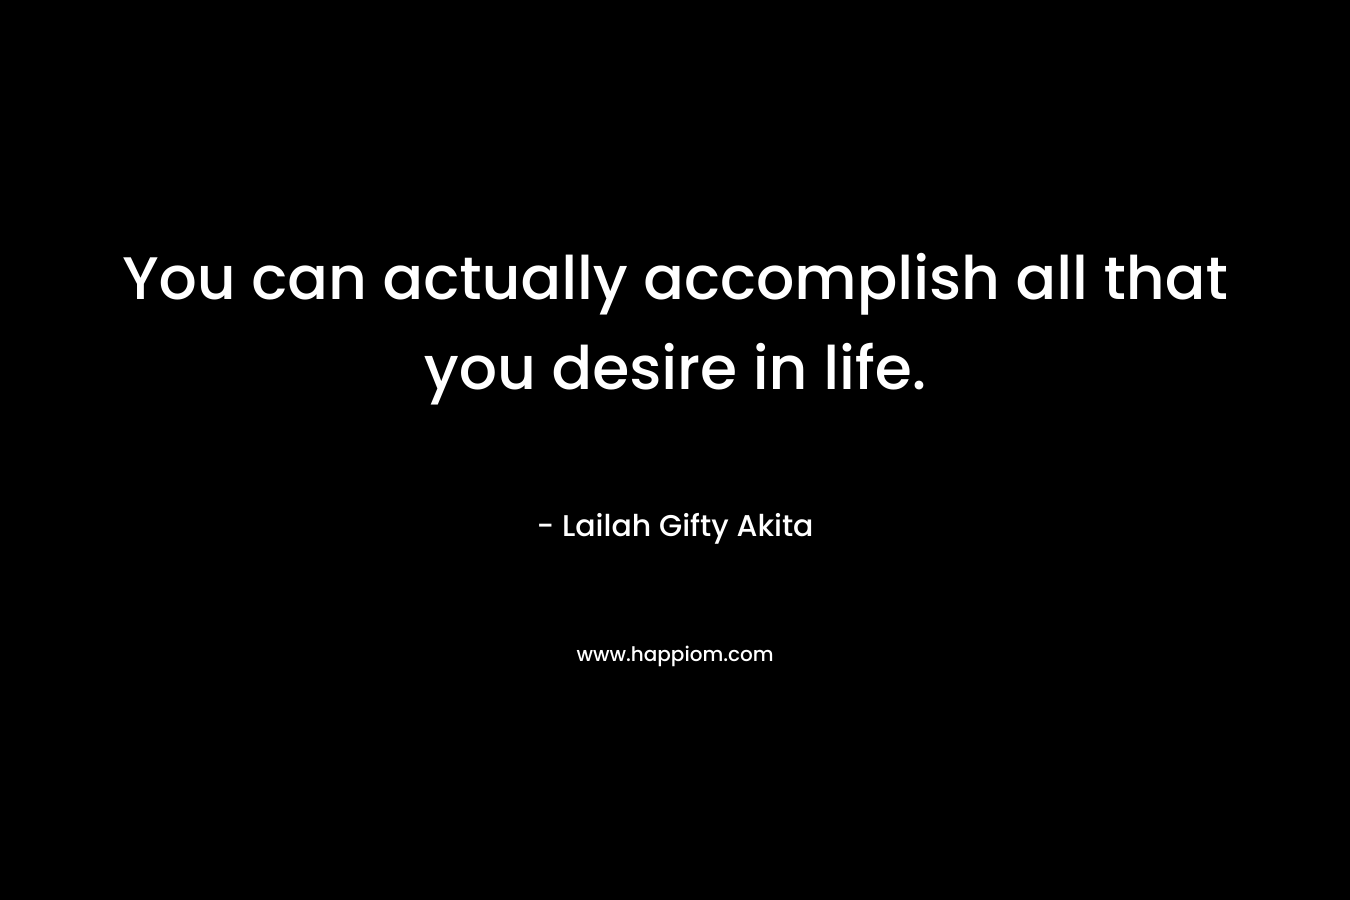 You can actually accomplish all that you desire in life.